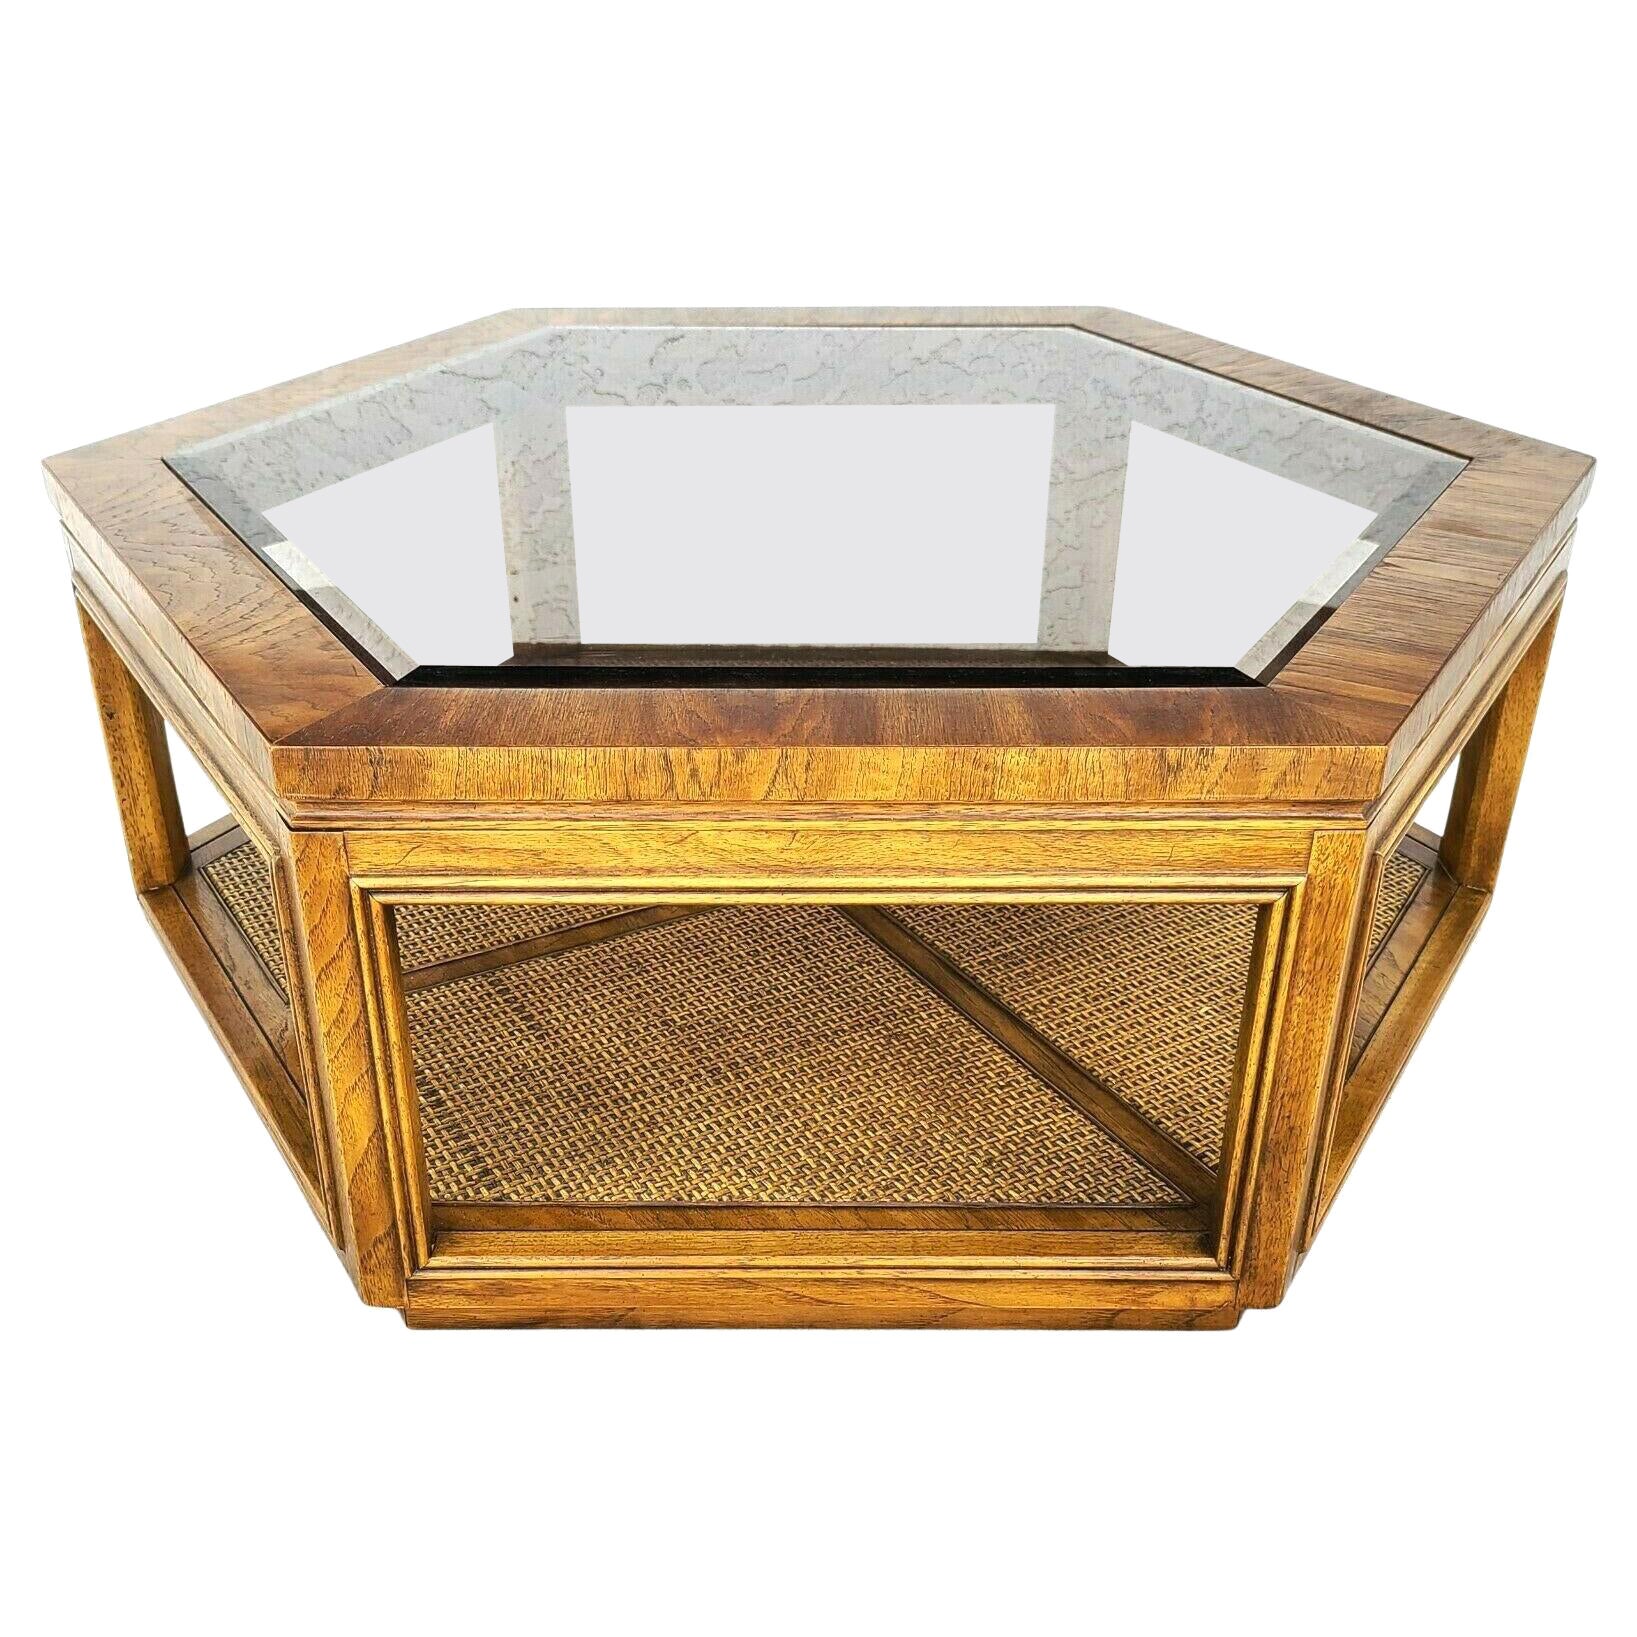 Vintage Accolade Hexagonal Glass Wicker Coffee Table by Drexel